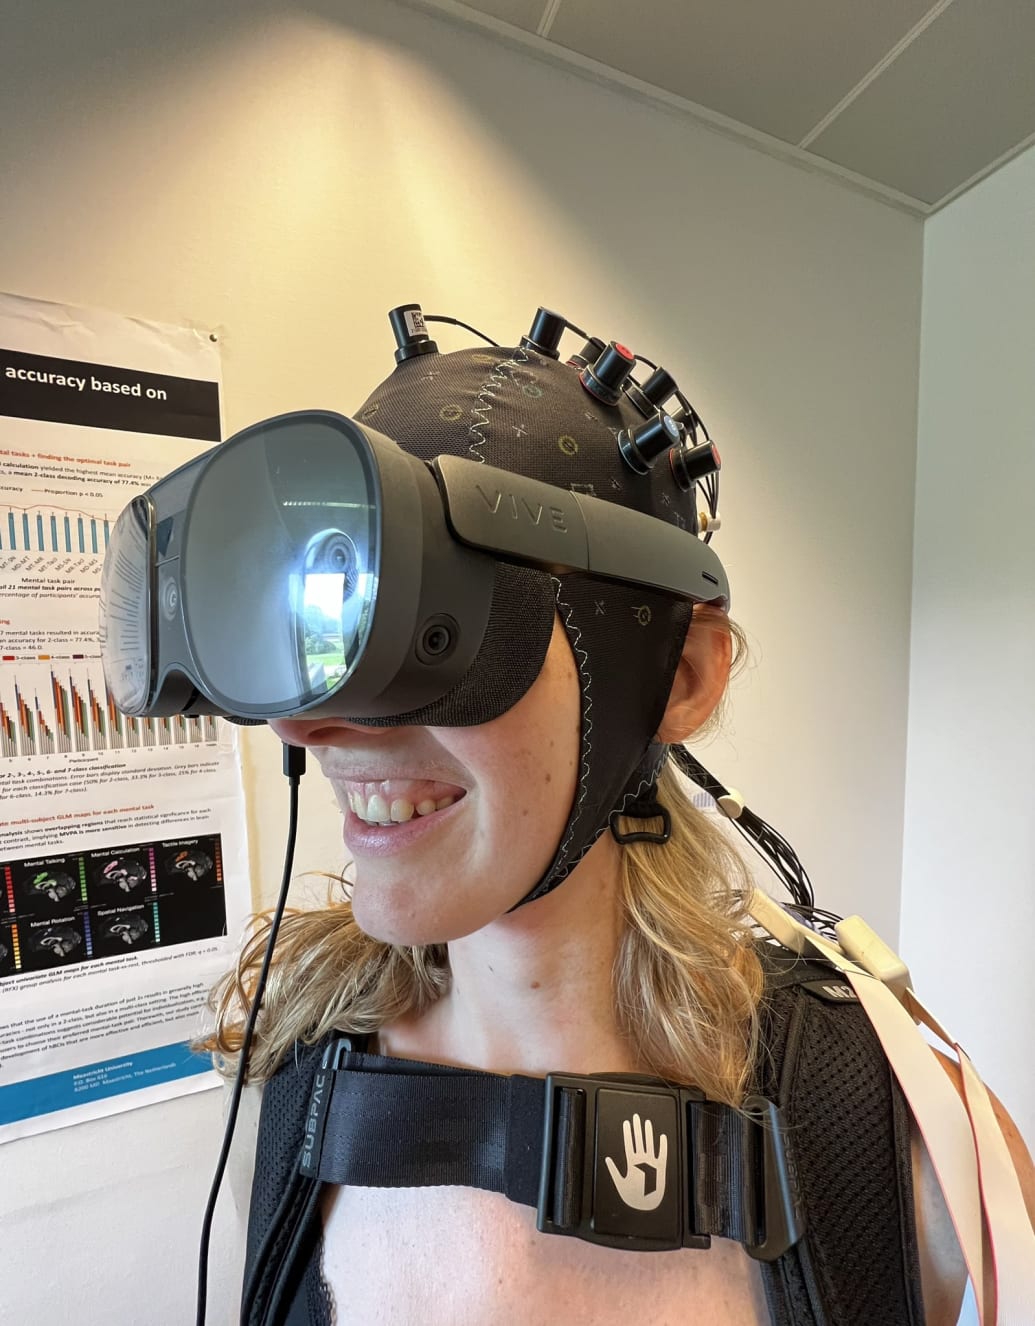 A test subject wears the VR headset with the fNIRS scanner.